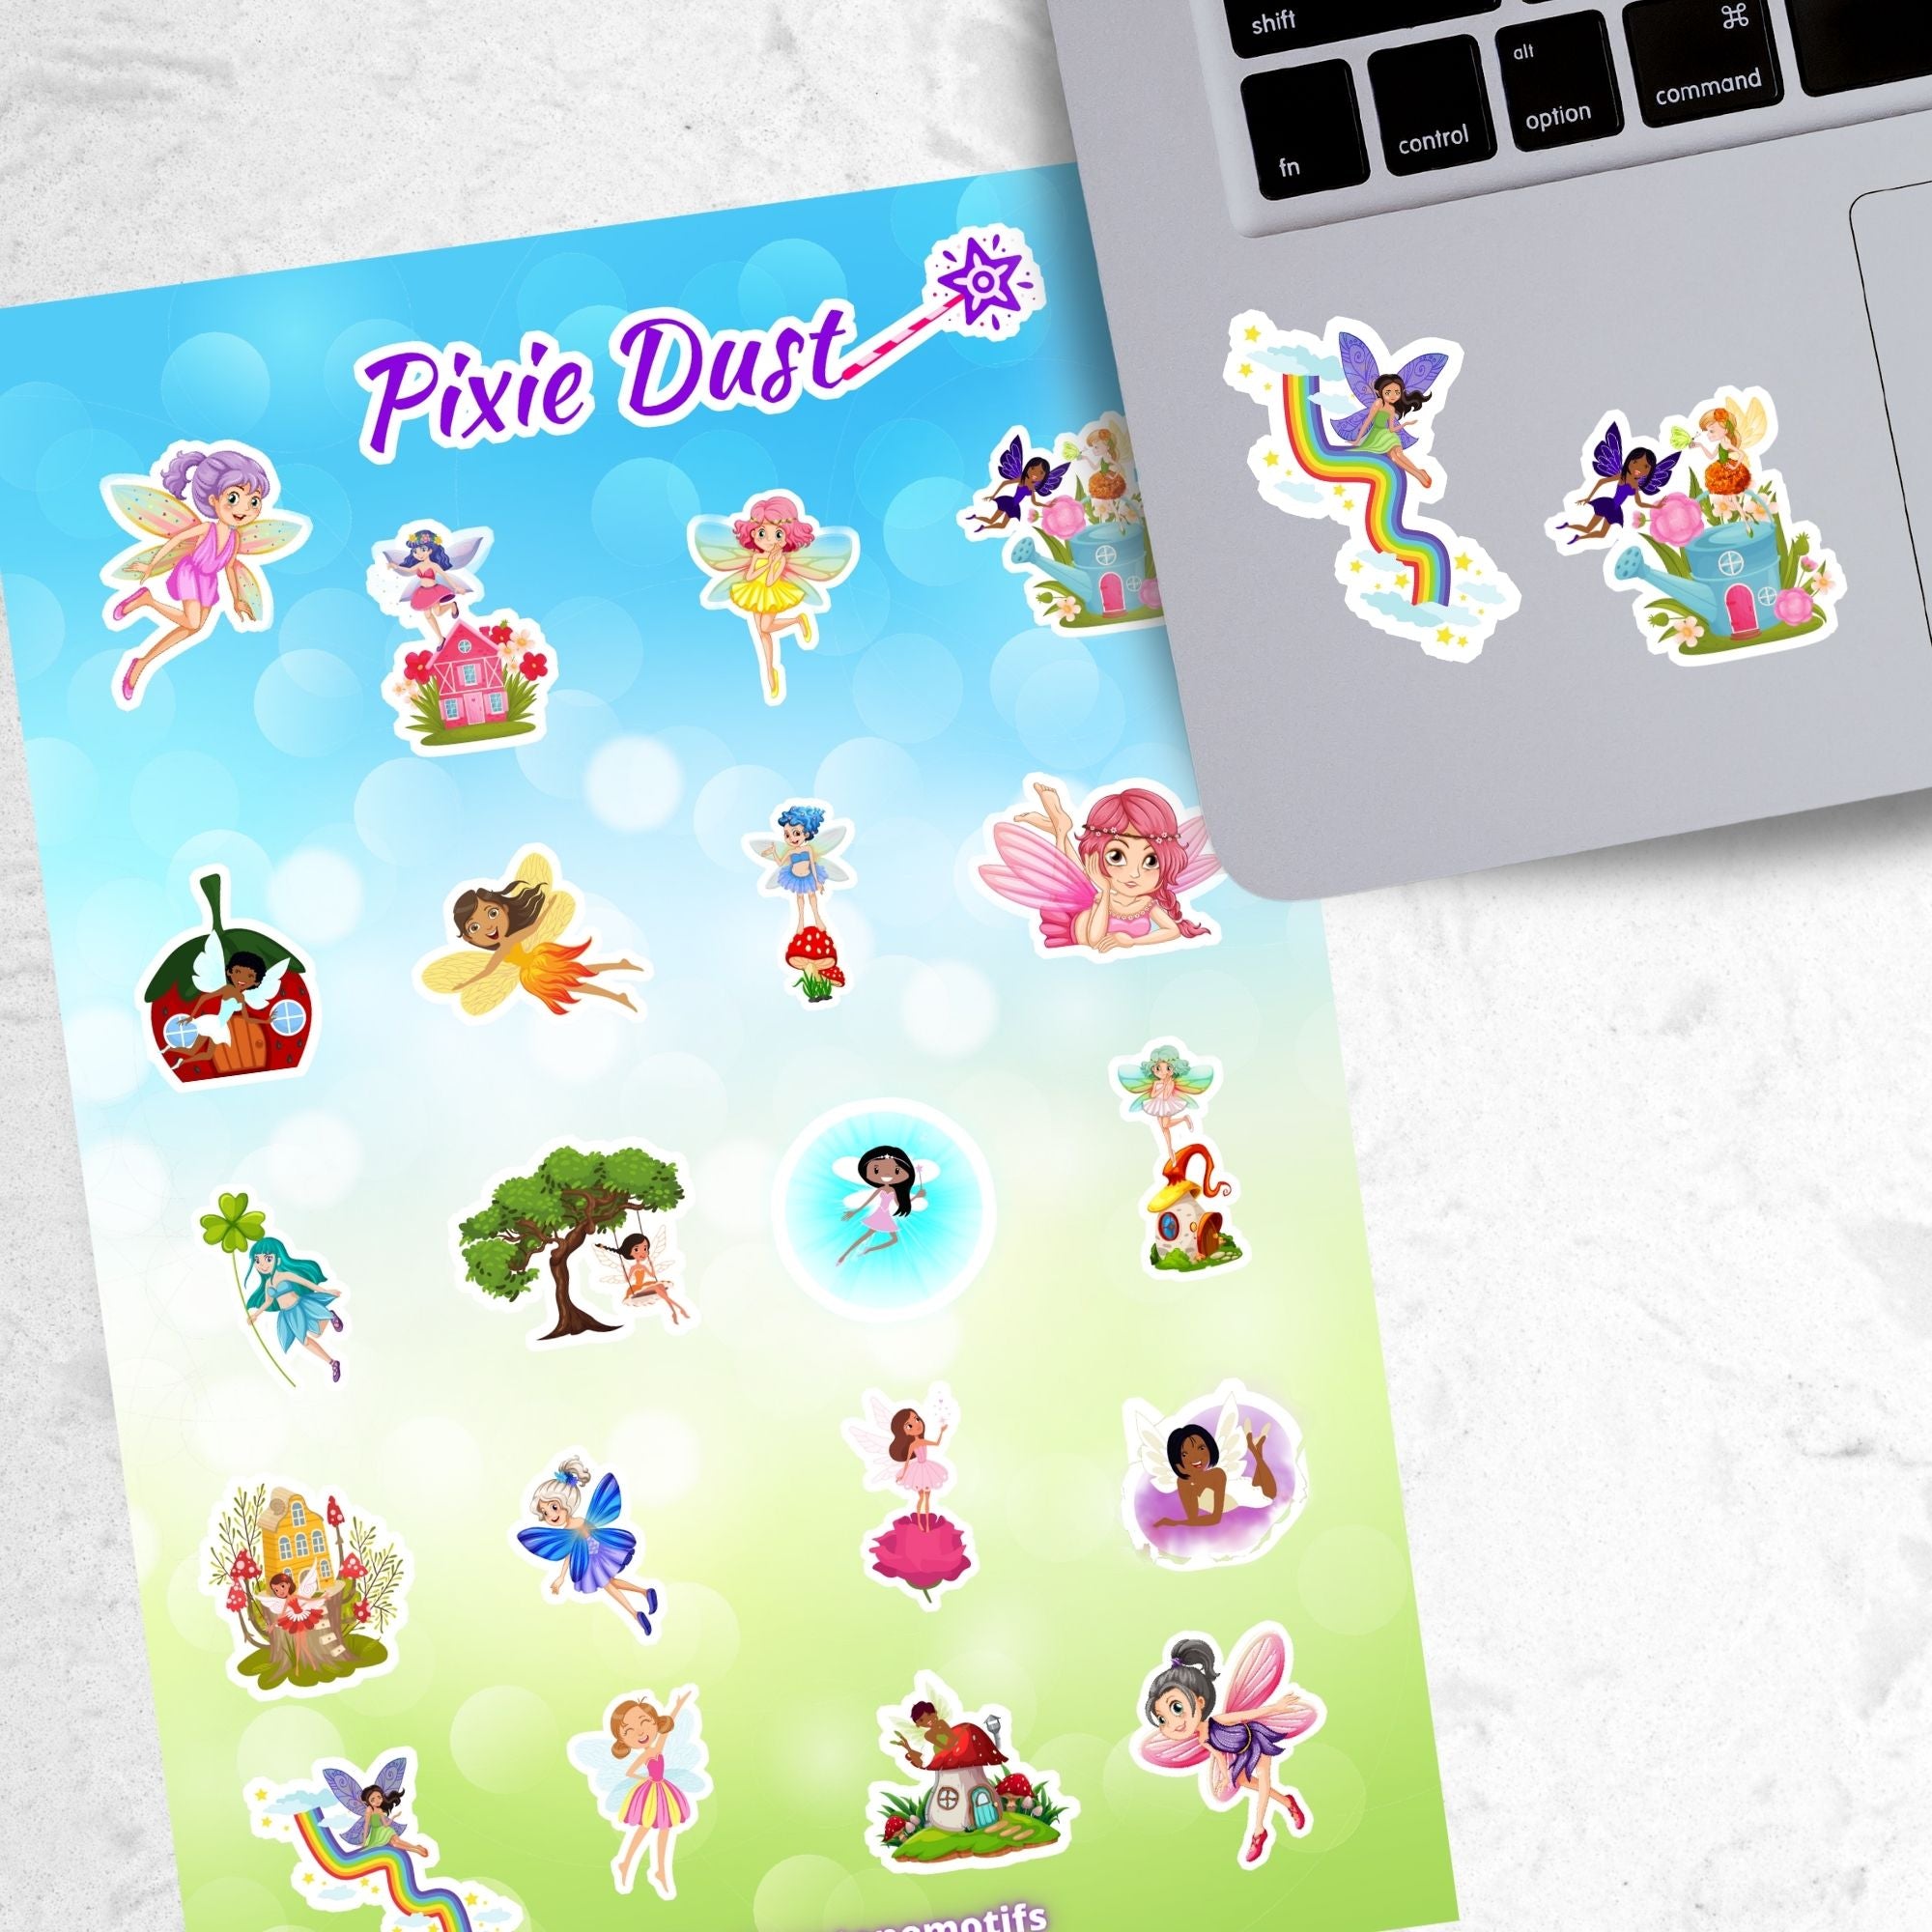 This sticker sheet has 20 different sticker images of fairies and it features a holographic sparkle overlay to give it that magical feel. This image shows the sticker sheet next to an open laptop with stickers of a fairy sliding down a twisty rainbow, and two fairies above a watering can house with flowers growing out of it, applied below the keyboard. 